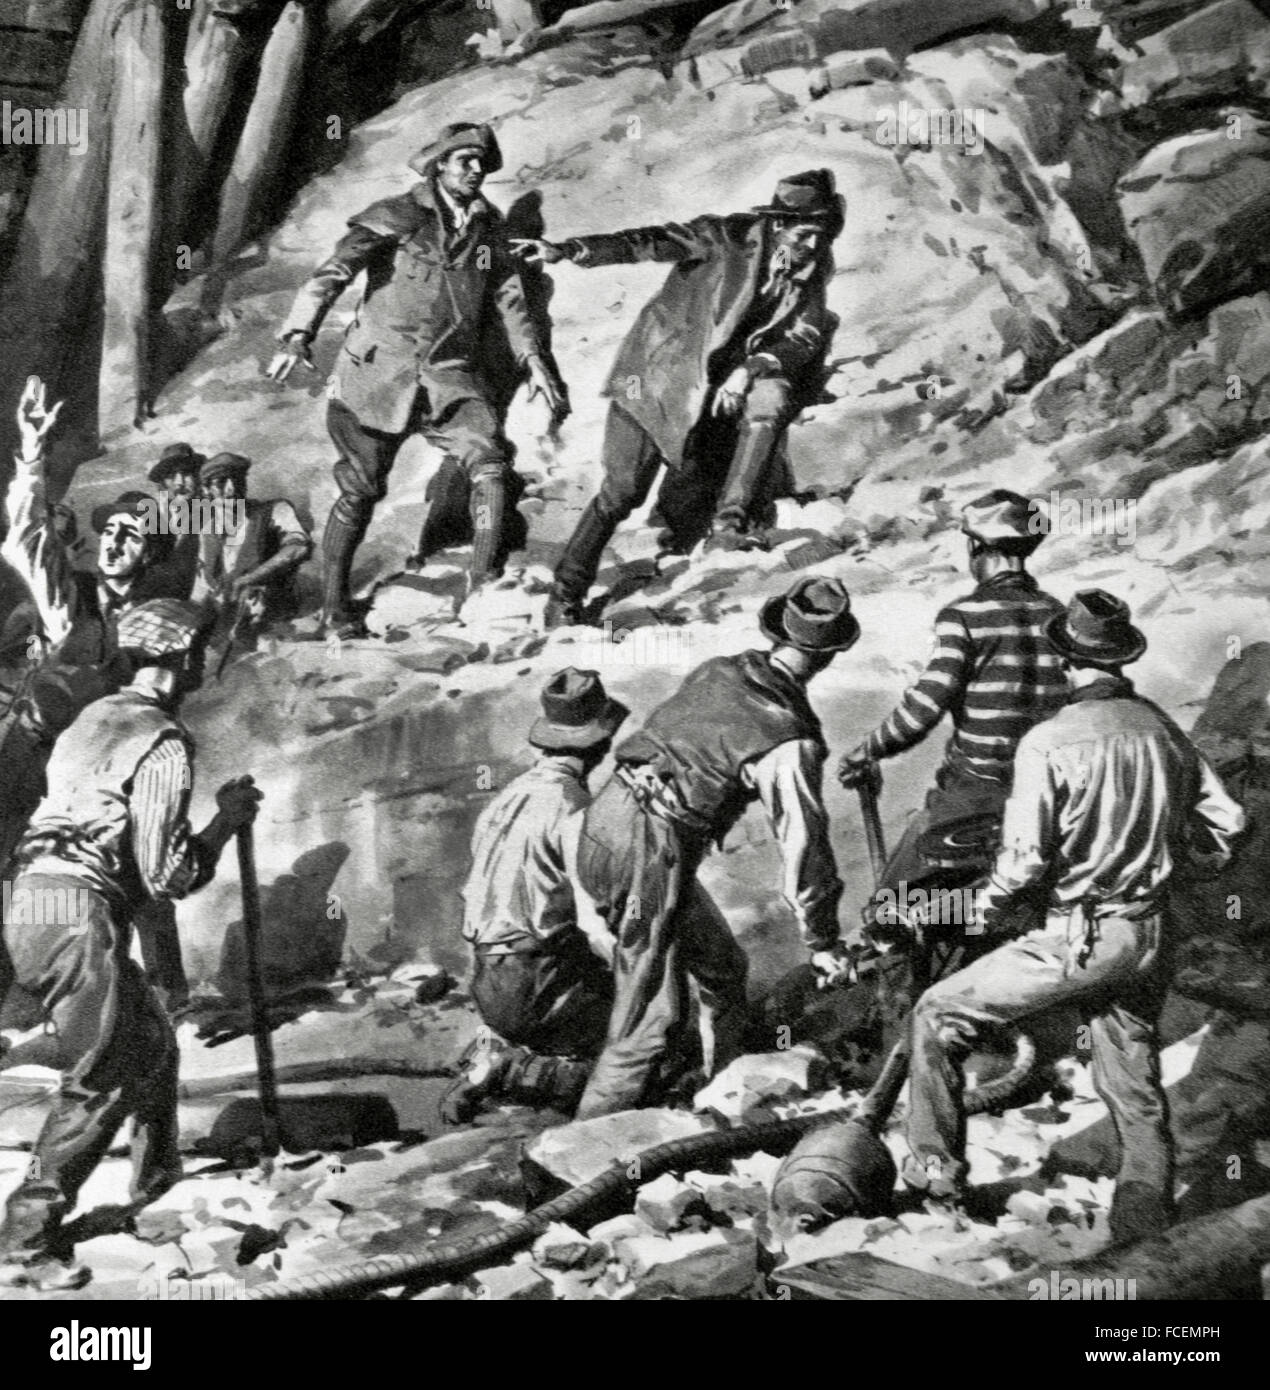 Fascist Italy. Workers preparing the demolition of a hillside to build the tunnel of the Apennines, new railway line Bologna-Florence, one of the great engineering feats of the fascist regime. Engraving. Stock Photo